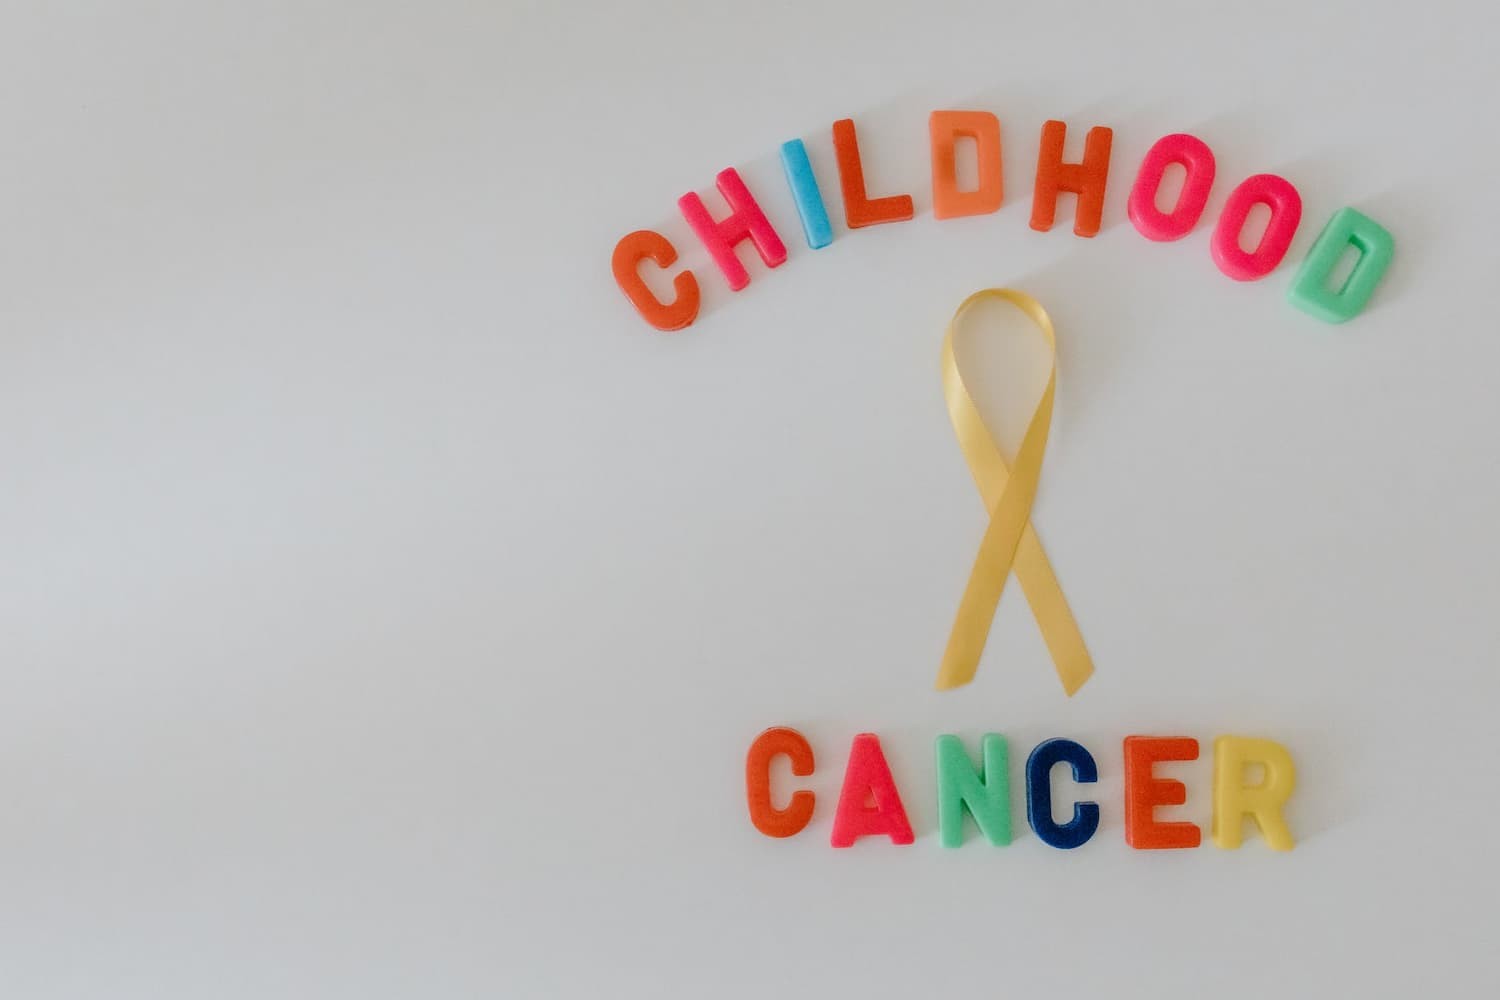 Improving the Lives of Children With Cancer